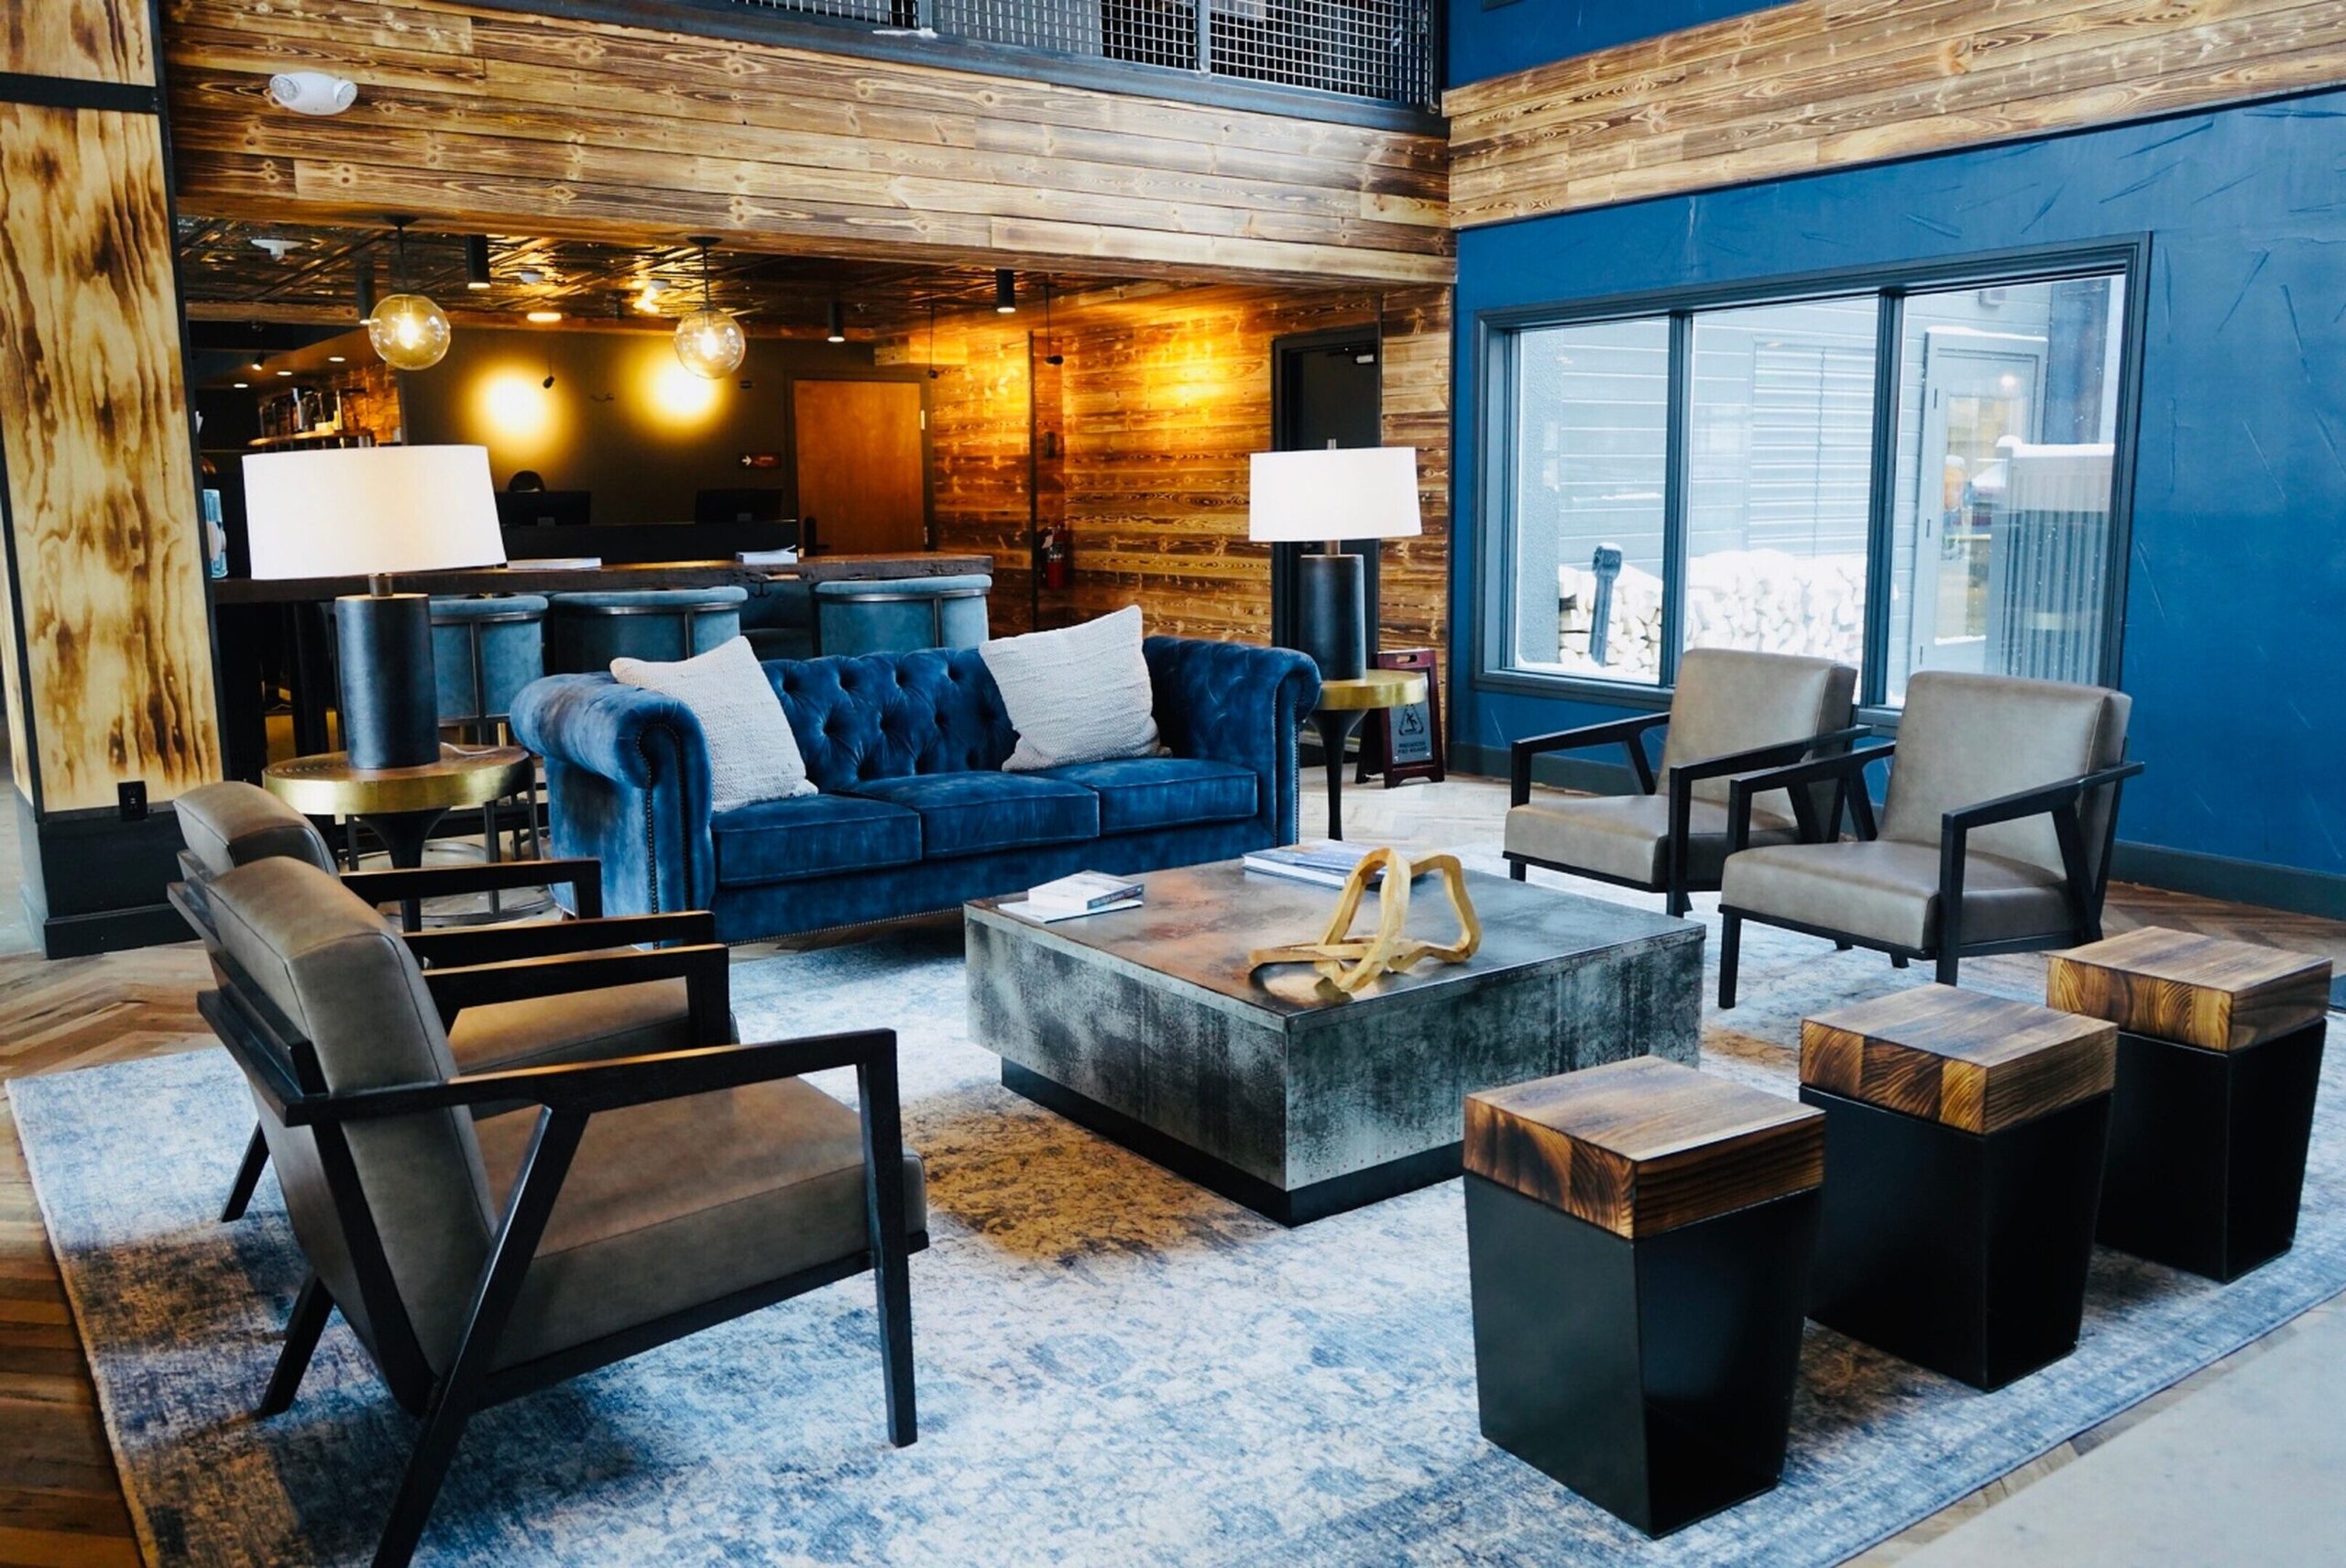 Experience Ultimate Comfort and Convenience at Gravity Haus Ski-in/Ski-out Hotel with a Restaurant in Breckenridge CO